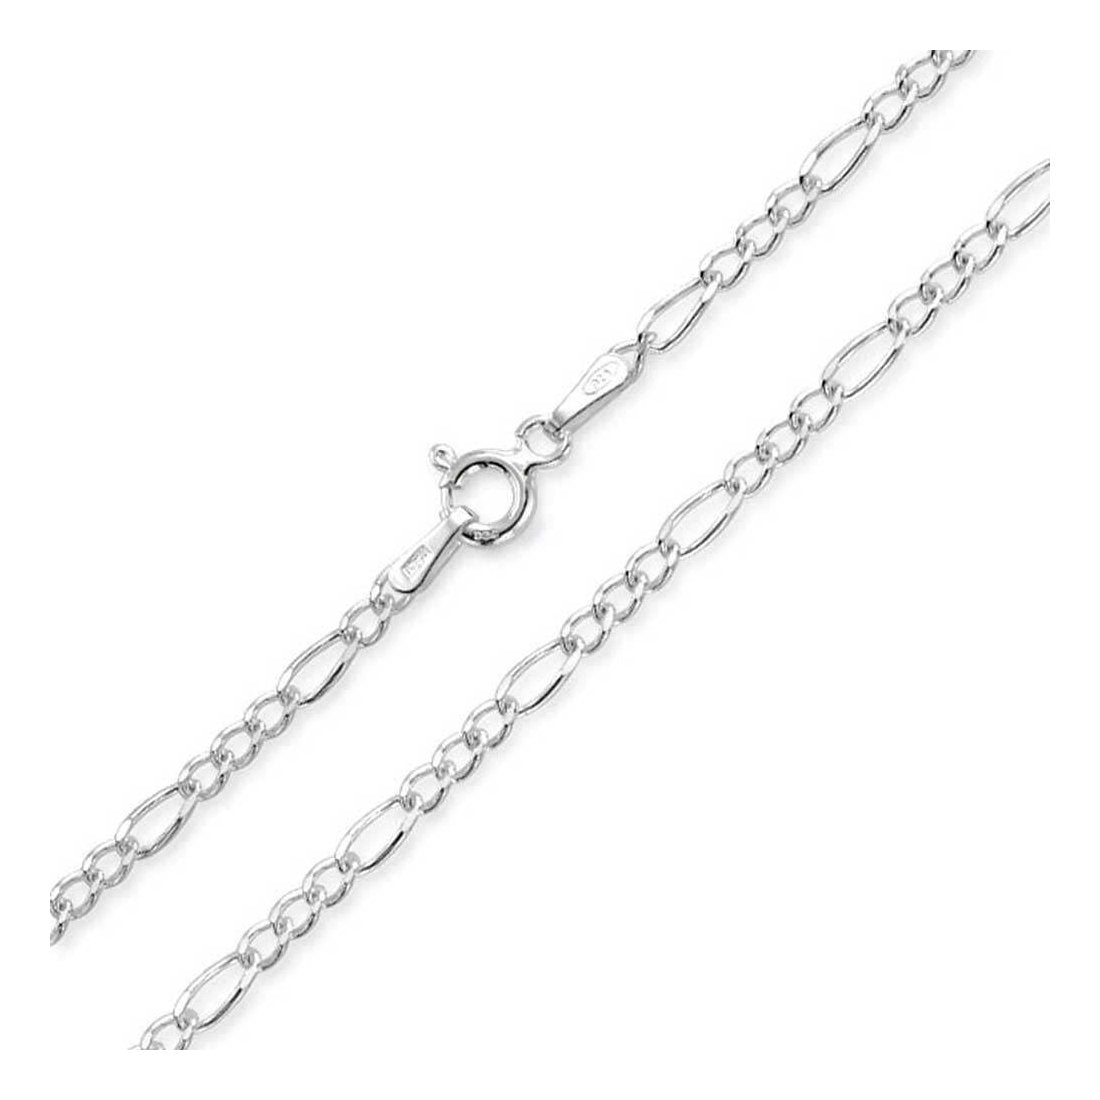 13.7MM 350 Figaro Link Chain .925 Solid Sterling Silver Sizes 8"-36" Inches